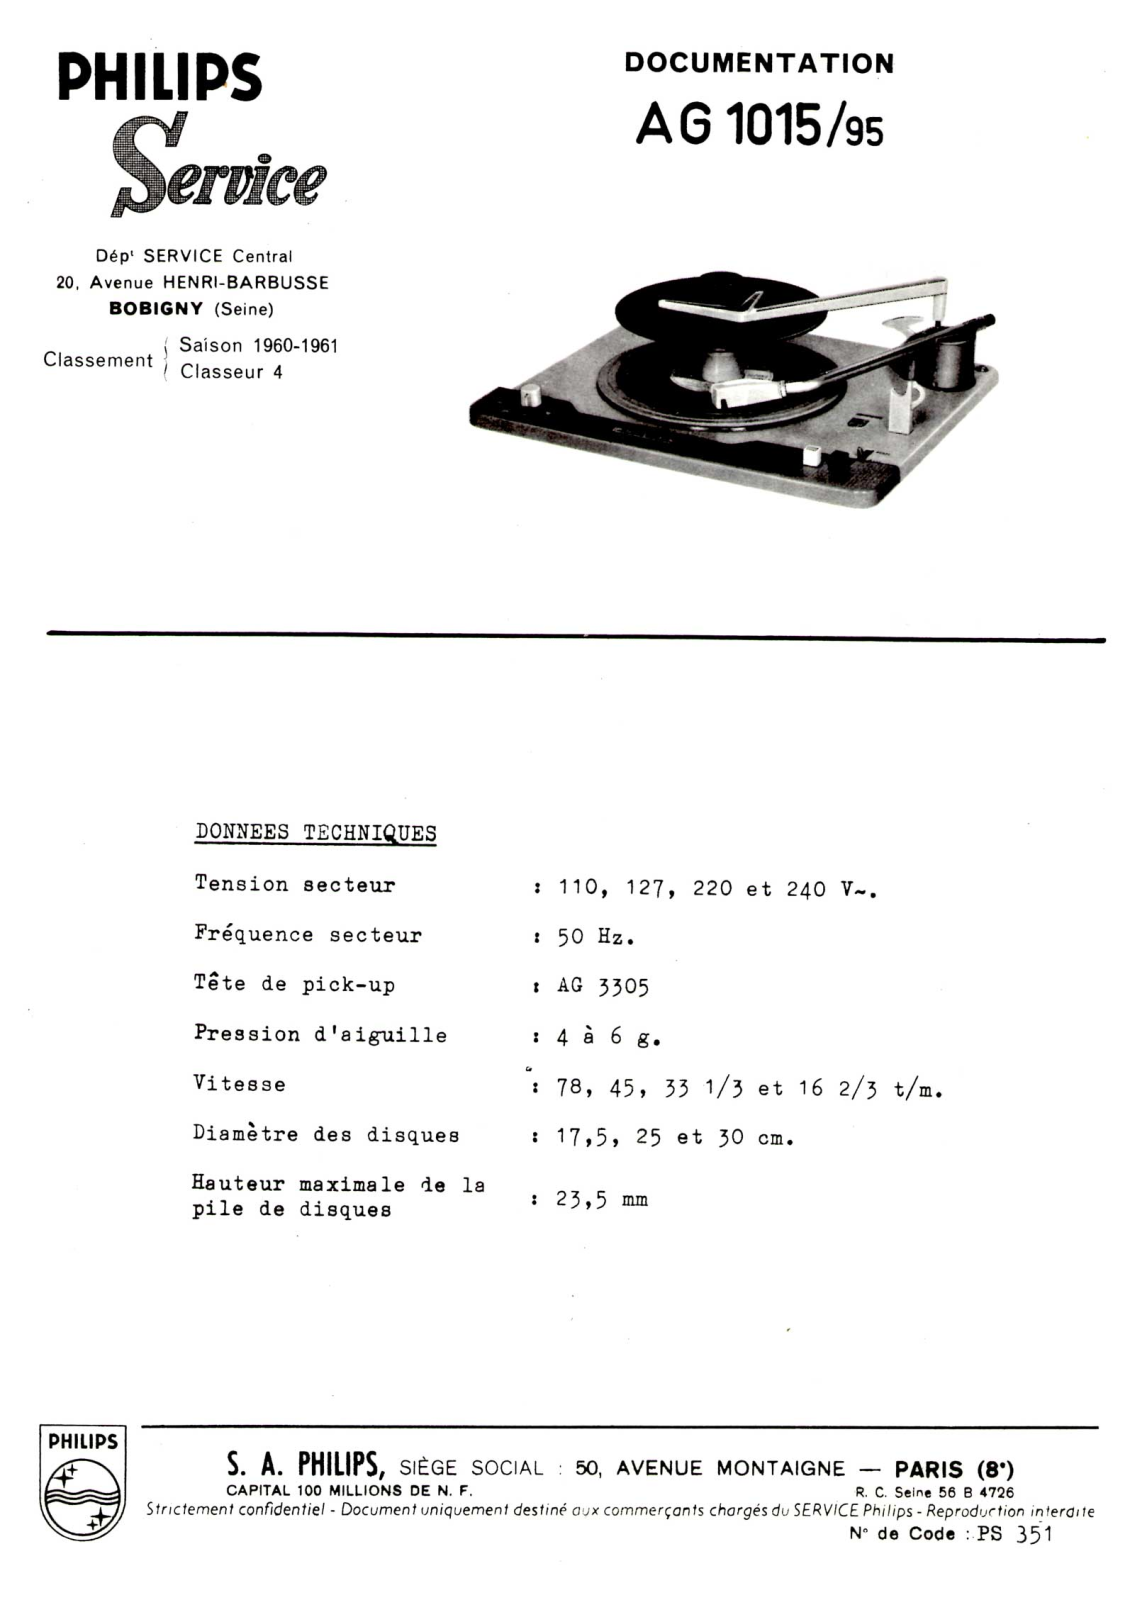 Philips AG-1015 Service Manual